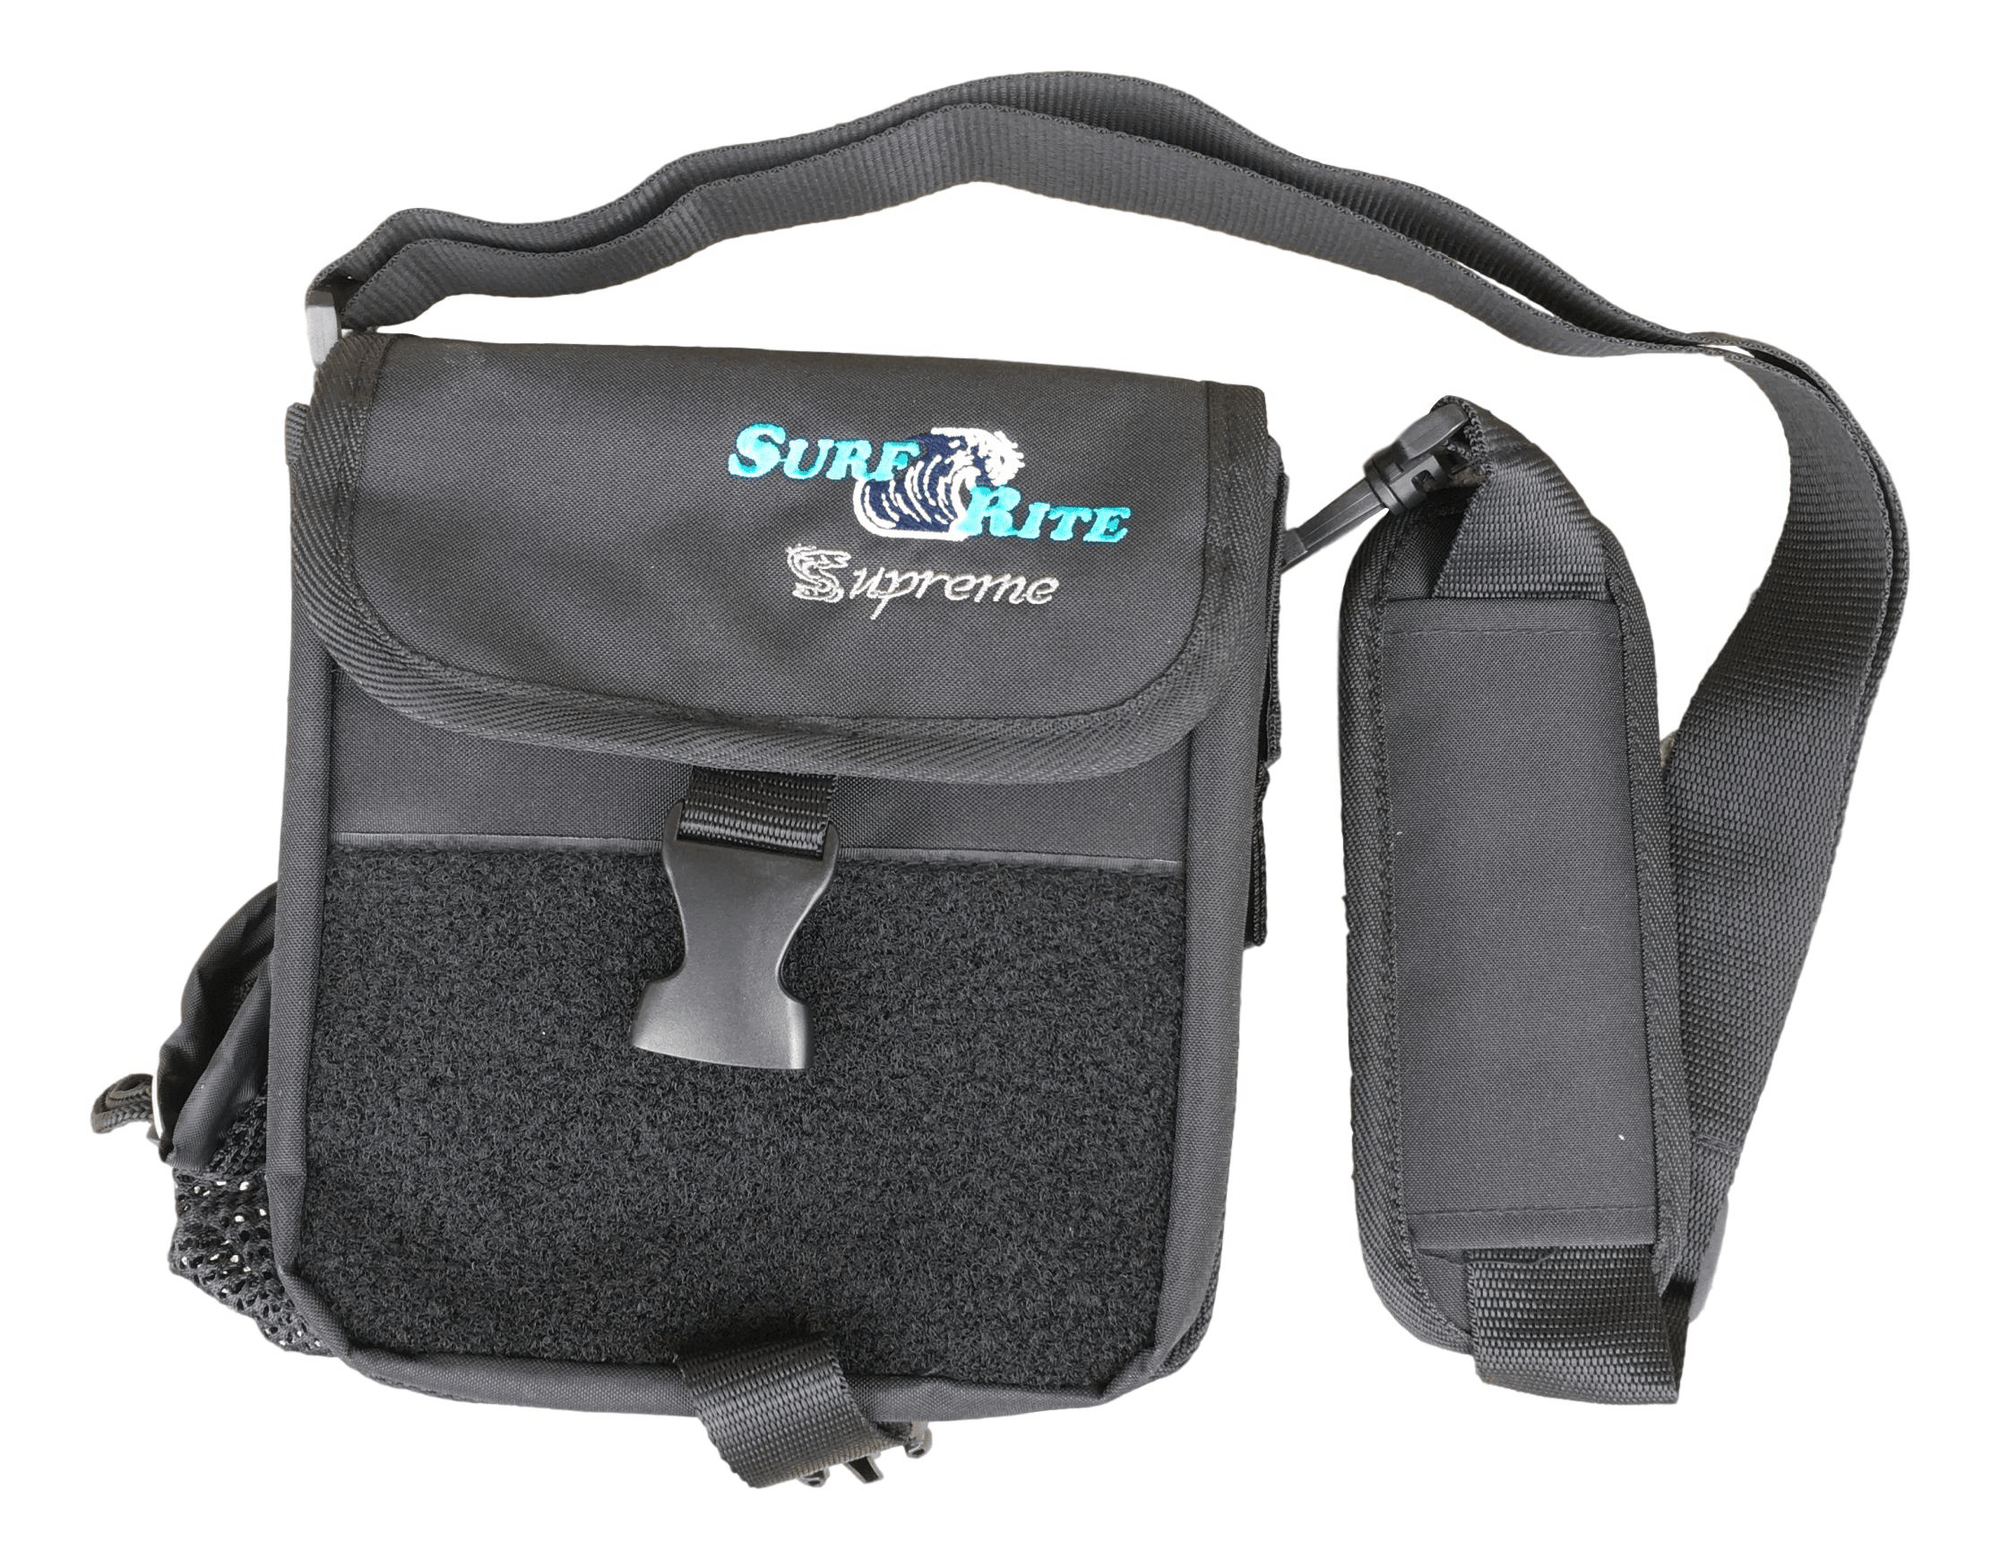 Surf Bags - The Saltwater Edge